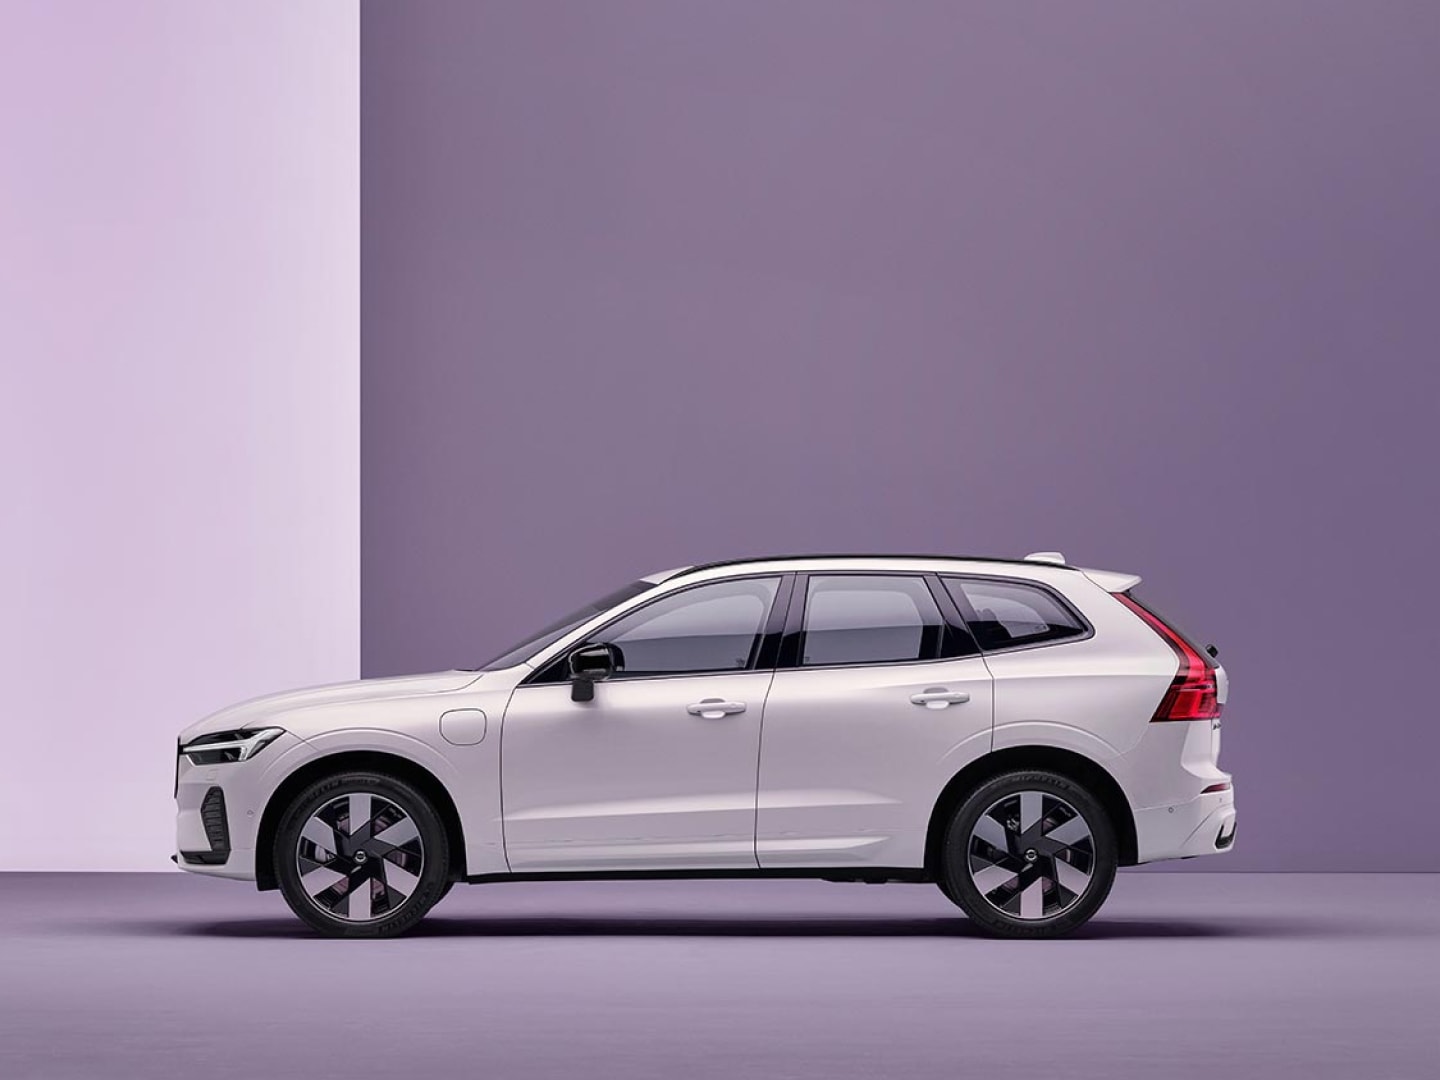 A Volvo XC60 plug-in hybrid charging in a purple surrounding.